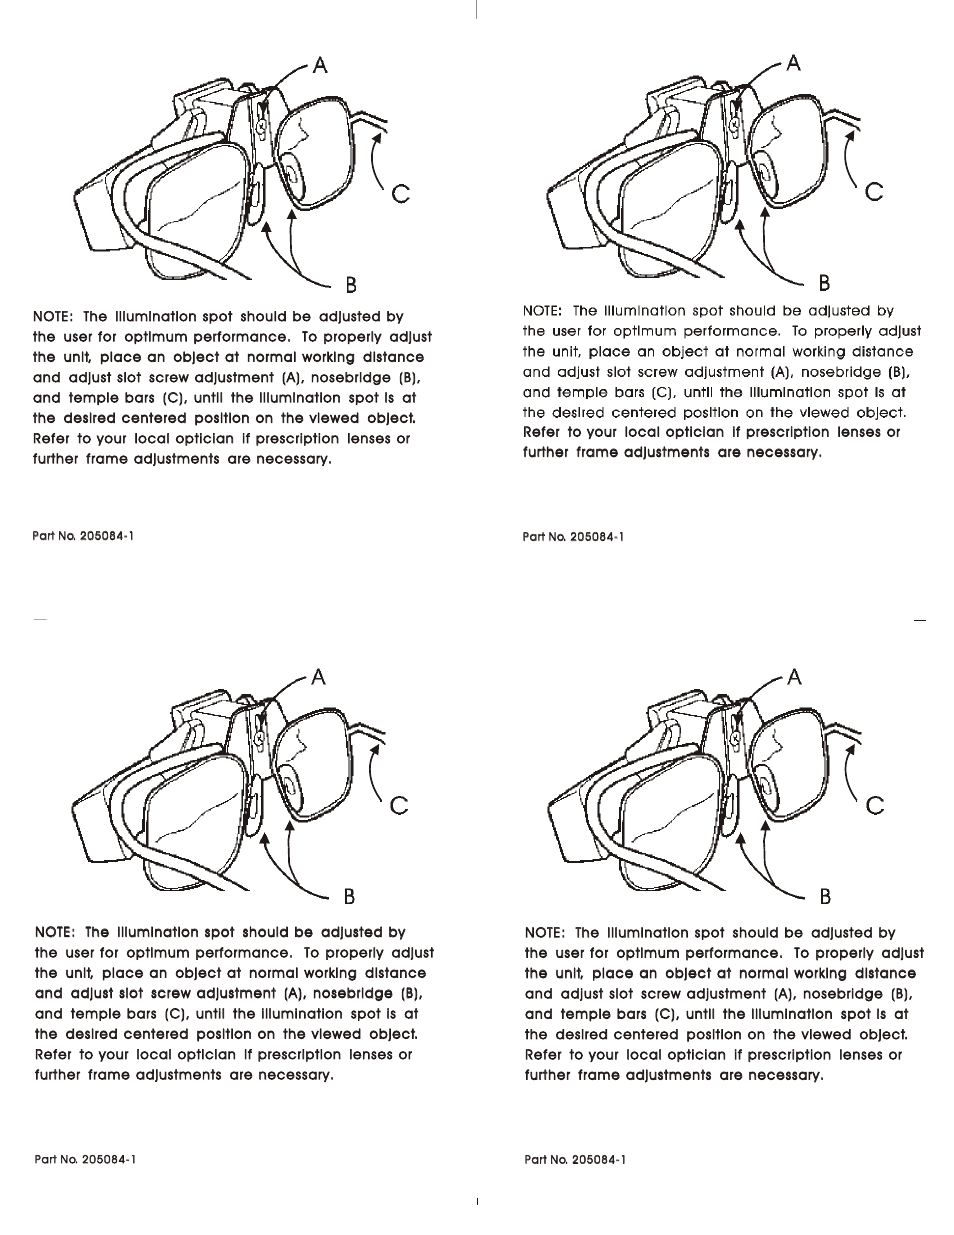 205084-1, Light Attached To Goggles - User Manual